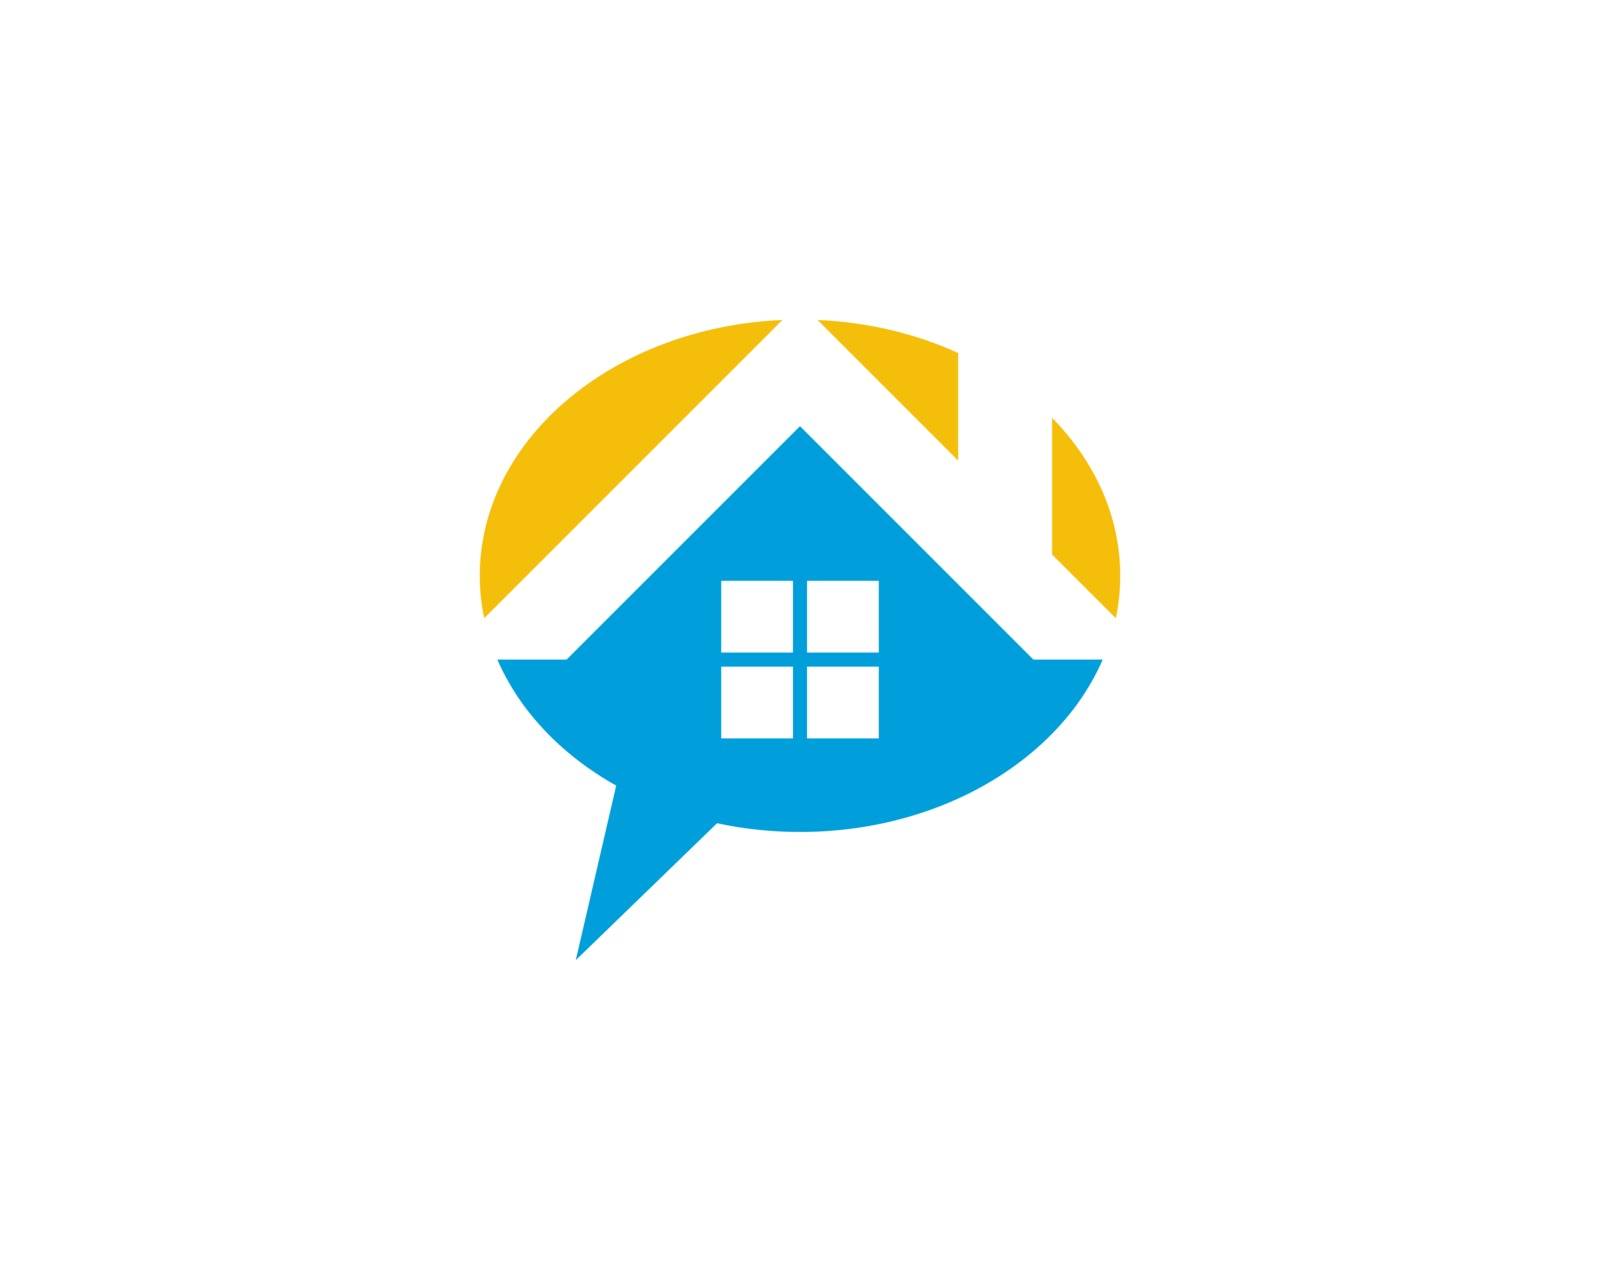 is a symbol related to communication especially for home or housing